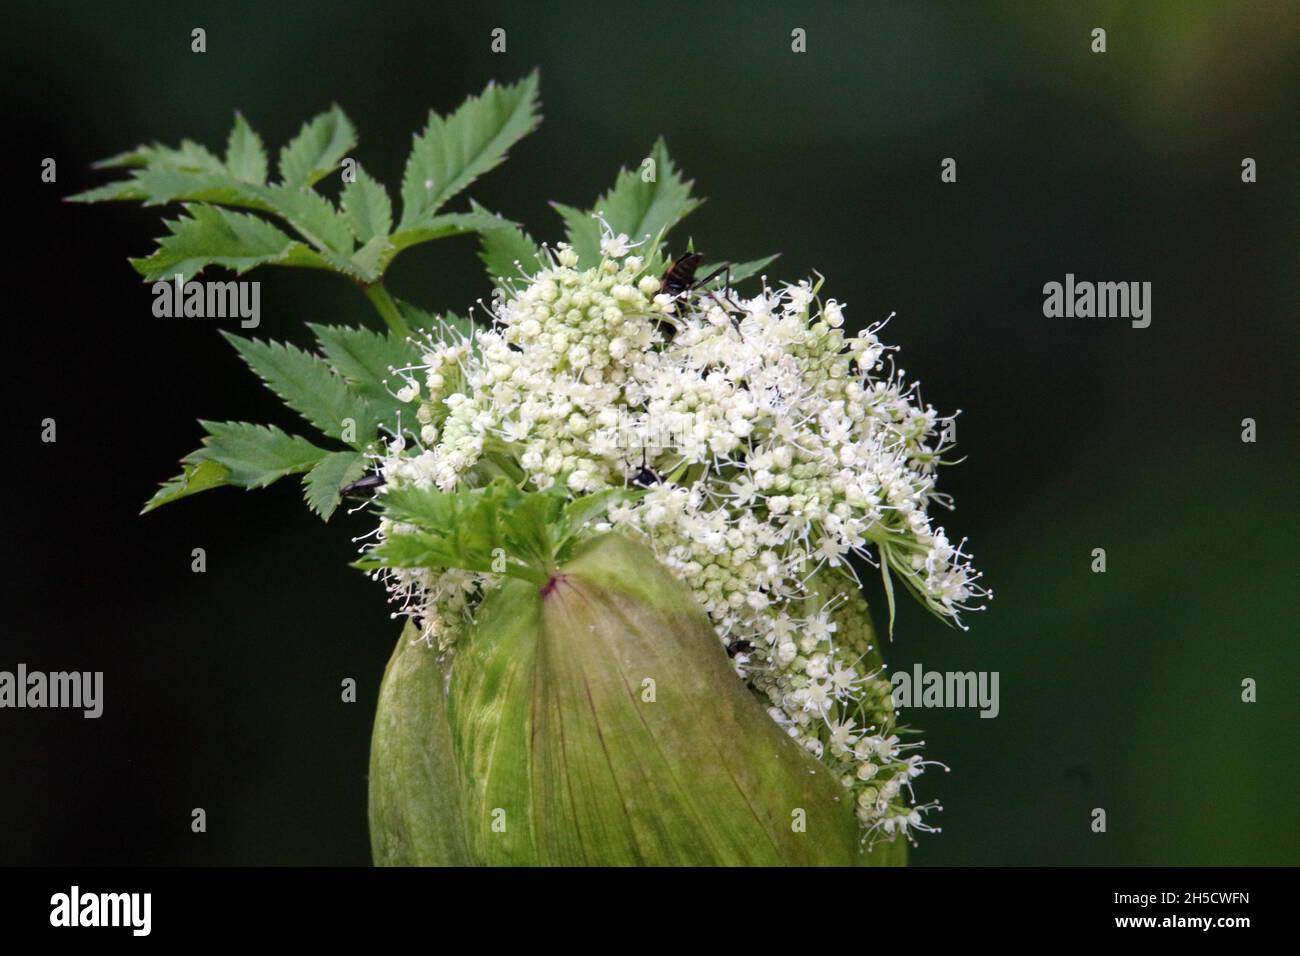 Wild angelica (Angelica sylvestris), blooming inflorescence, Germany Stock Photo